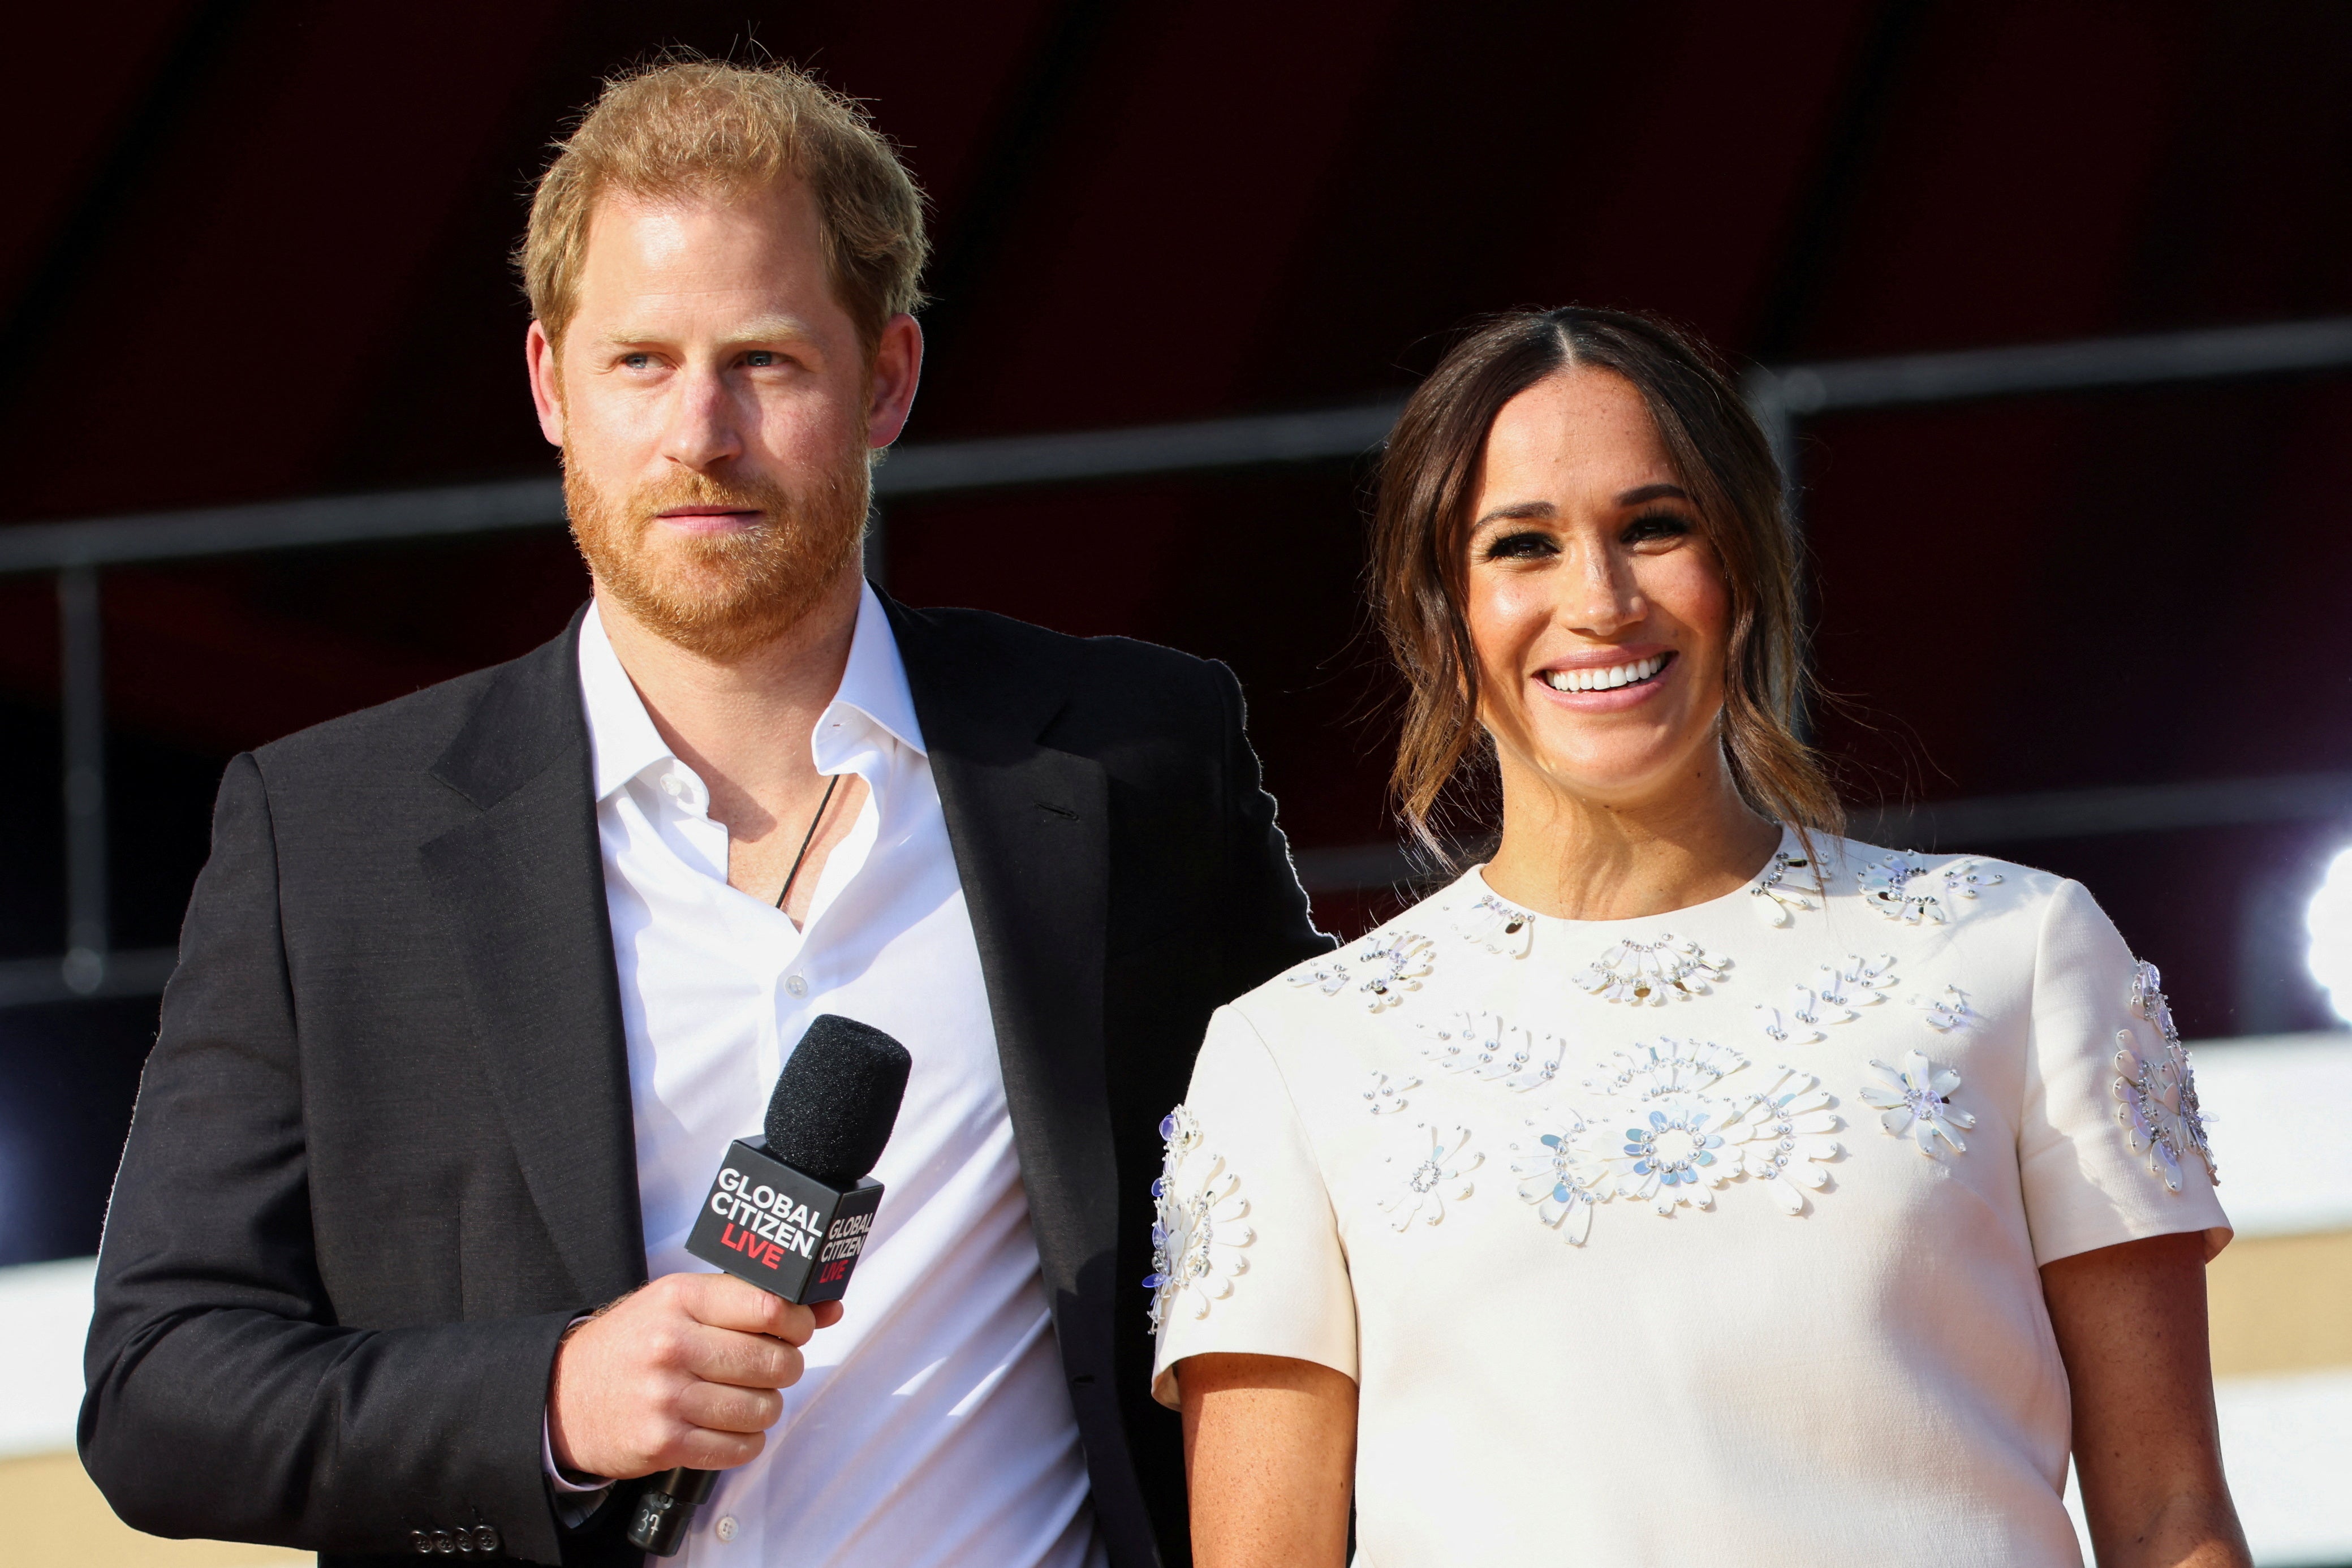 Prince Harry and Meghan Markle revealed all about their time in the firm in a tell-all interview with Oprah Winfrey.